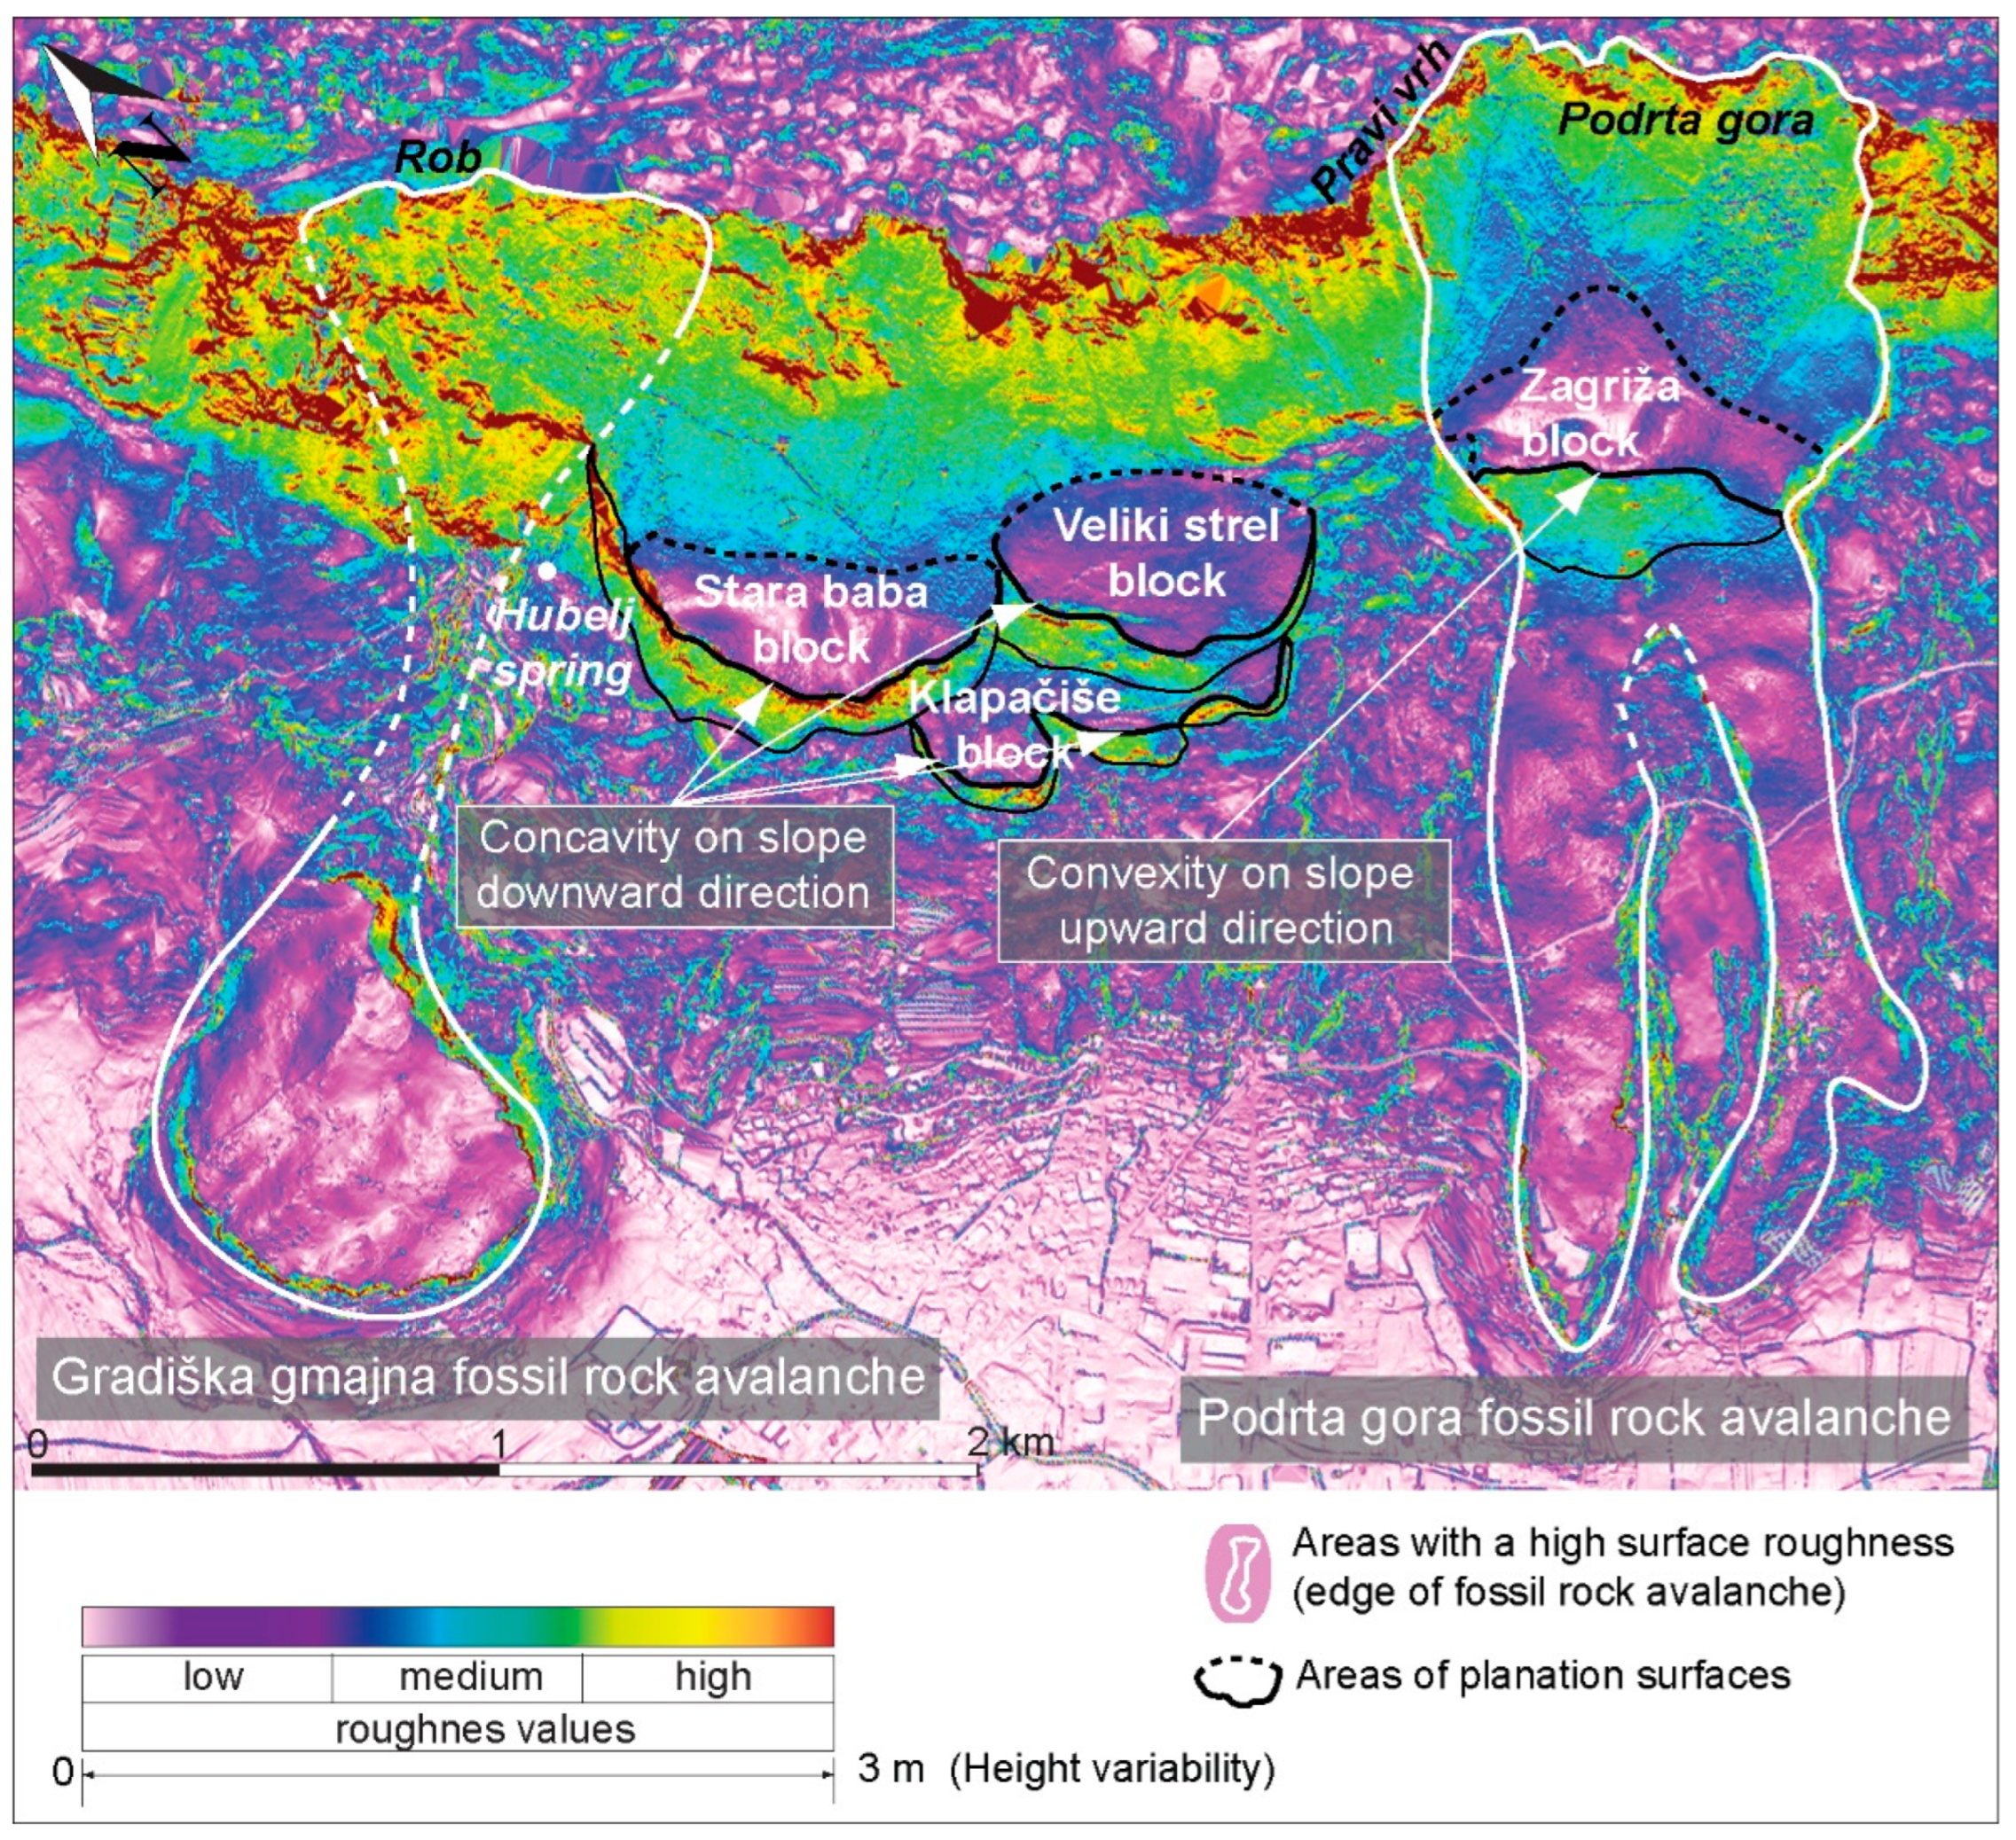 Remote Sensing | Free Full-Text | Using a Lidar-Based Height Variability  Method for Recognizing and Analyzing Fault Displacement and Related Fossil  Mass Movement in the Vipava Valley, SW Slovenia | HTML